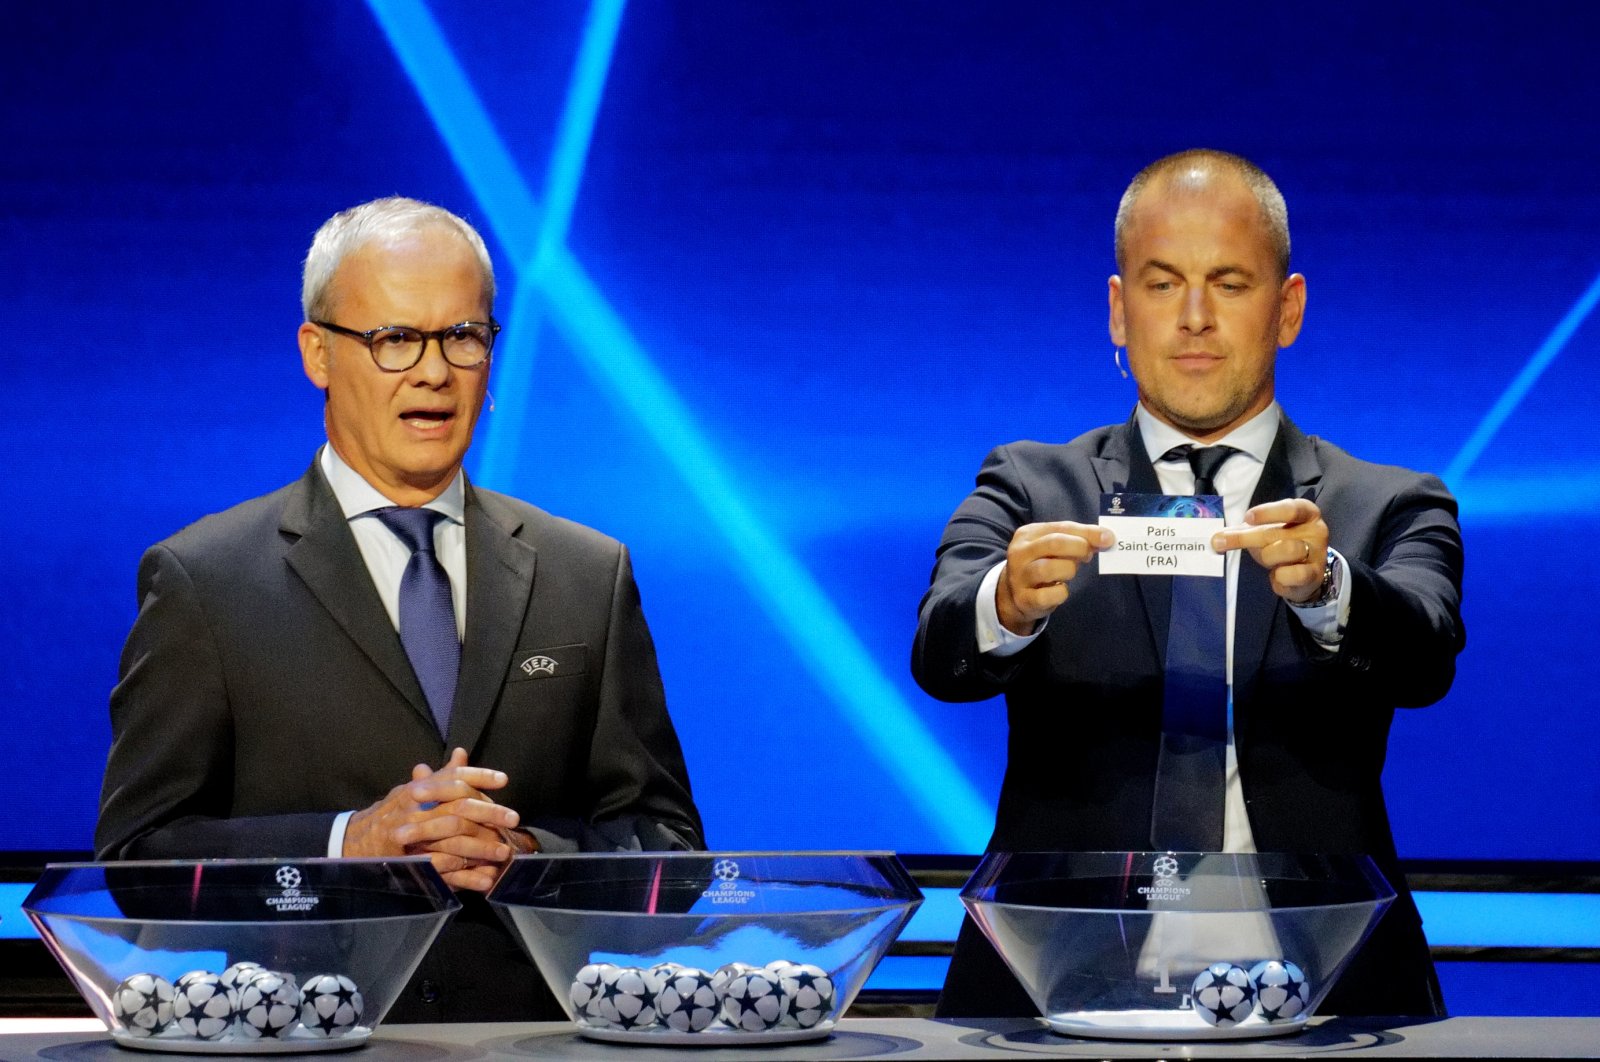 PSG under ‘fire’ as Champions League draw unleashes sizzling groups